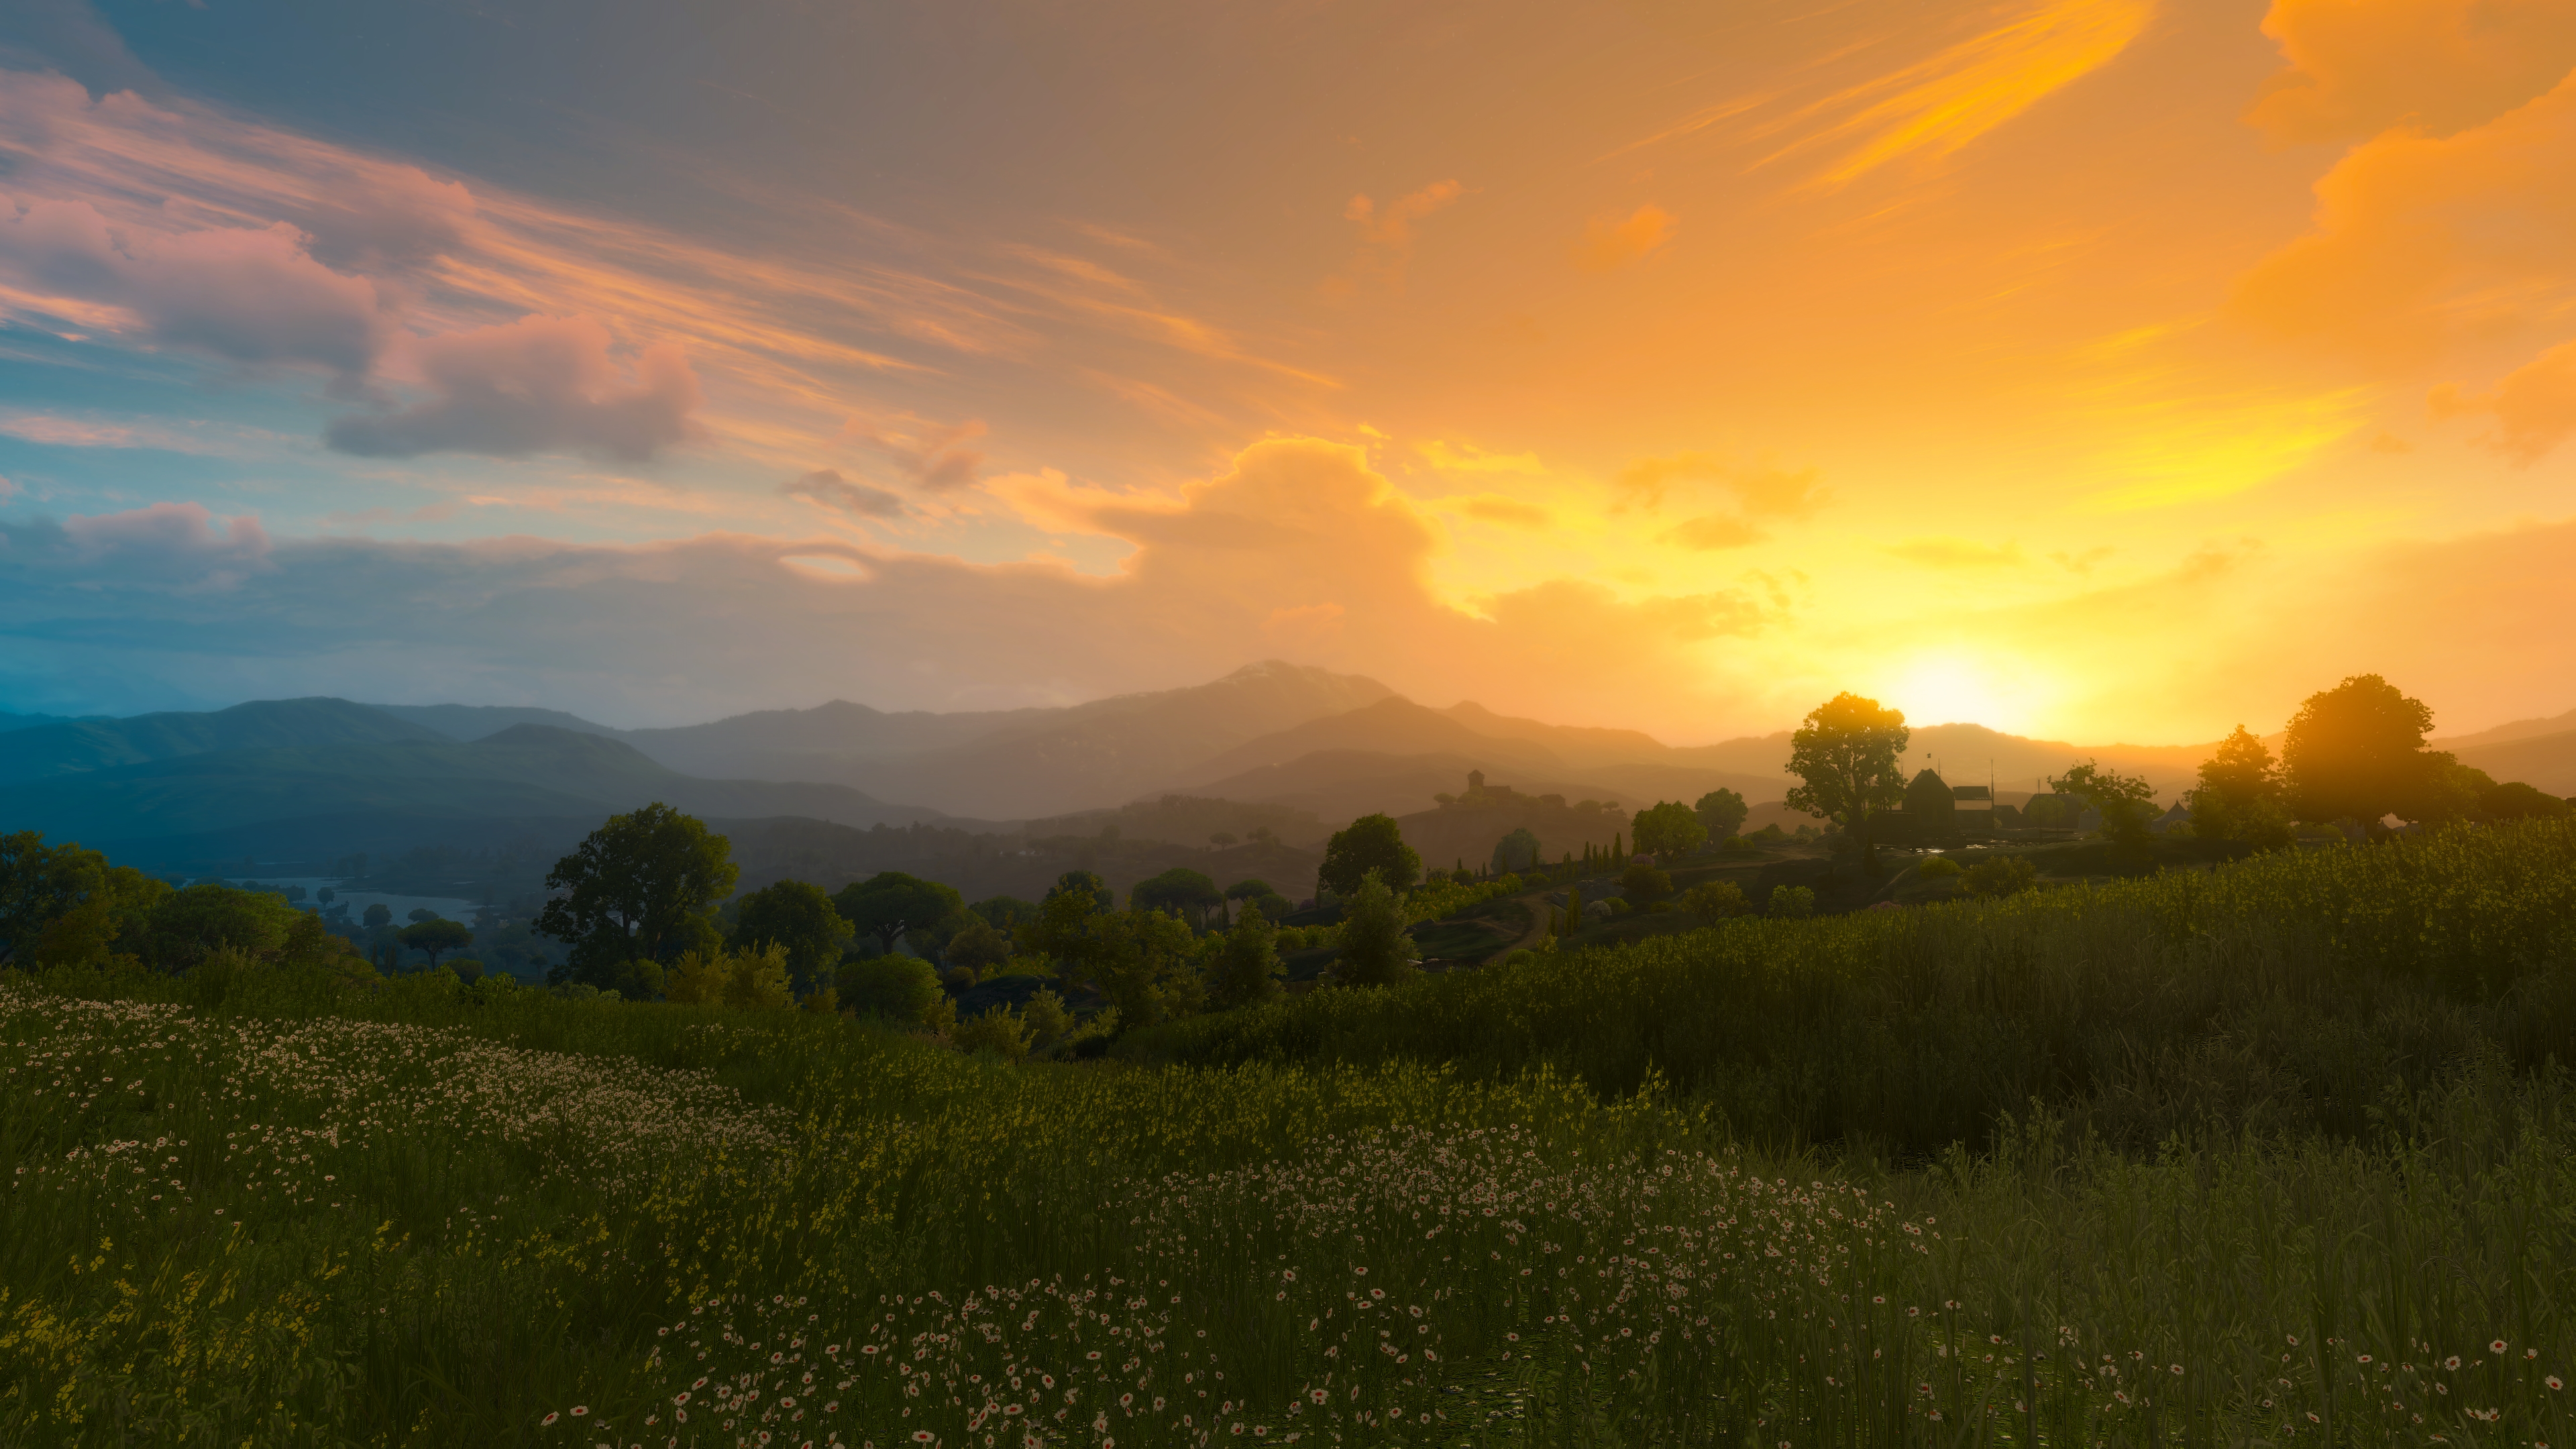 General 3840x2160 The Witcher 3: Wild Hunt PC gaming video games The Witcher 3: Wild Hunt - Blood and Wine sunset landscape field dawn tussent video game art screen shot sunset glow sunlight Sun clouds sky